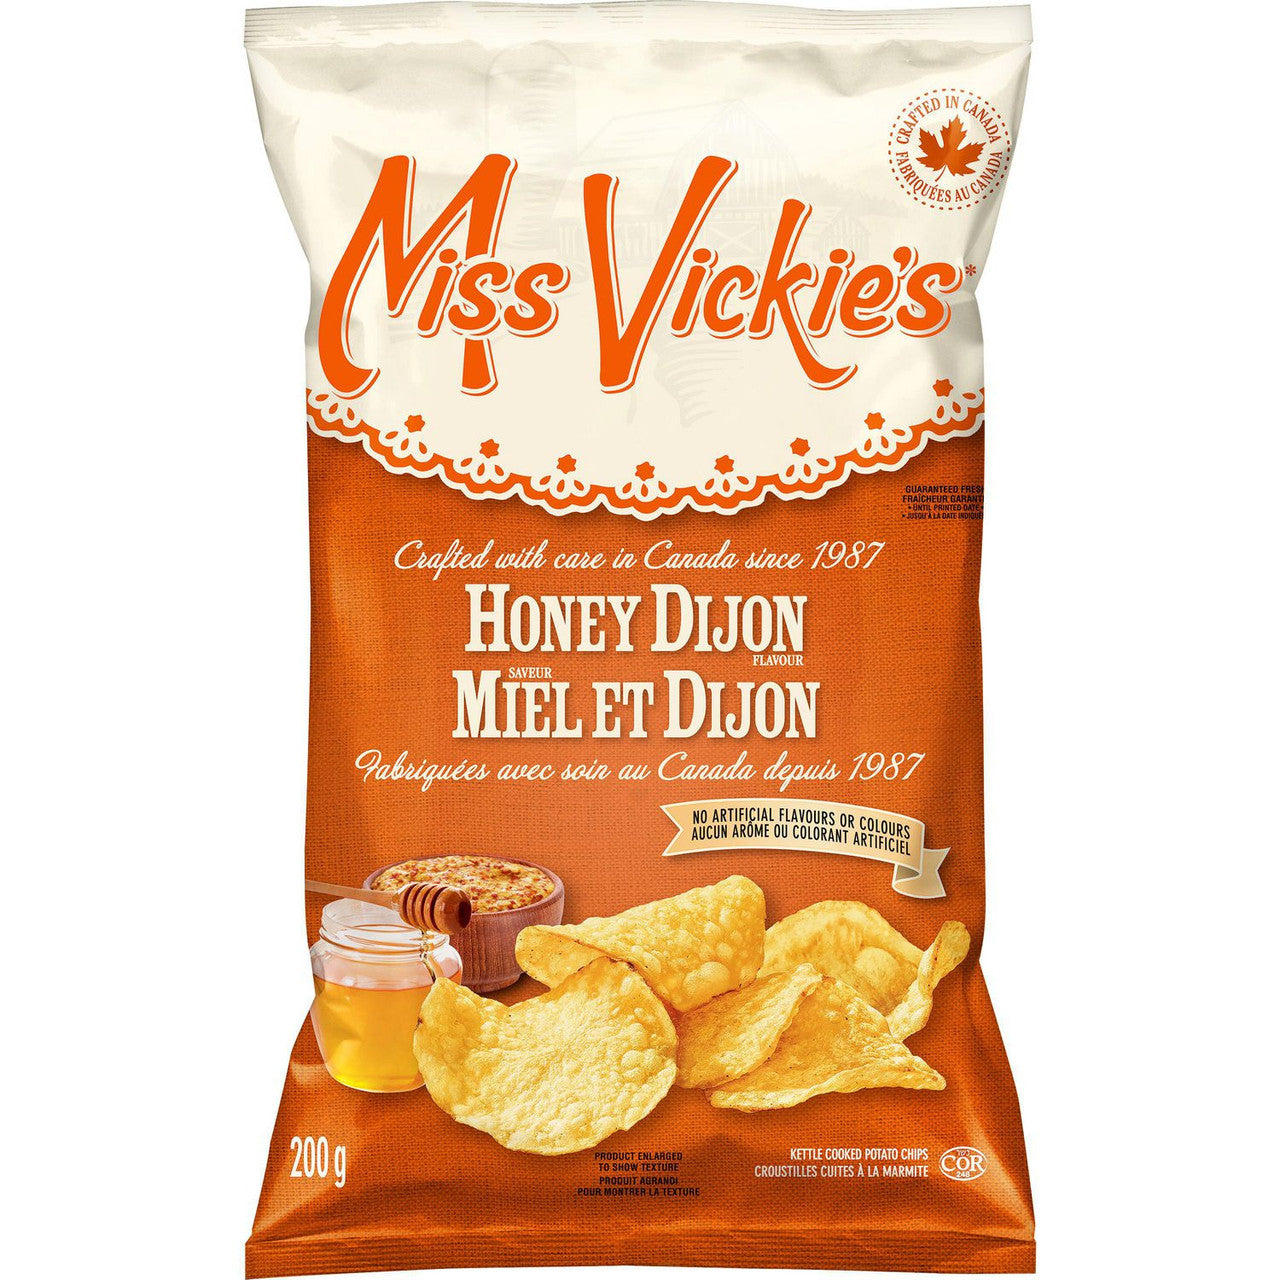 Miss Vickies Kettle Cooked Honey Dijon, 200g/7.1oz, (Imported from Canada)